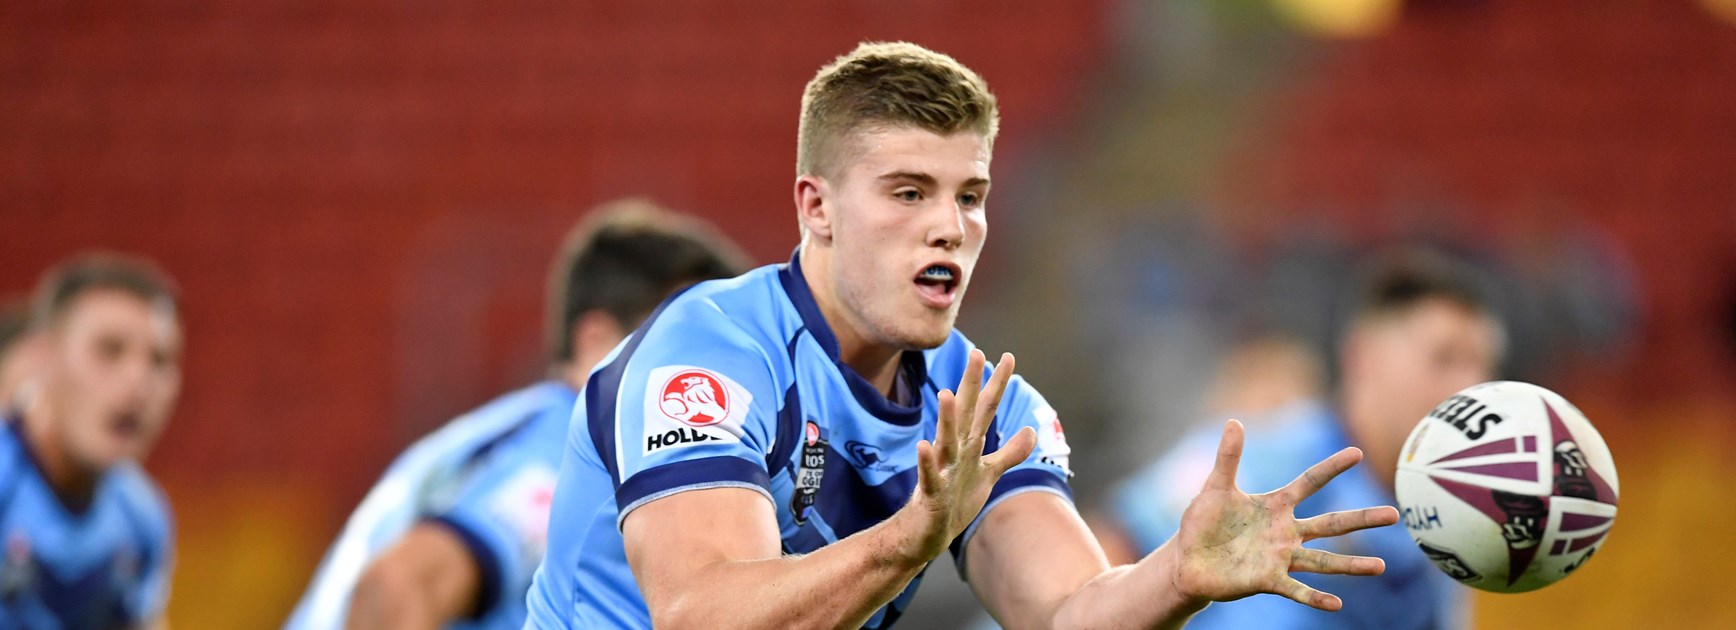 Raiders rising star Jack Murchie playing for the NSW Under 18 side.